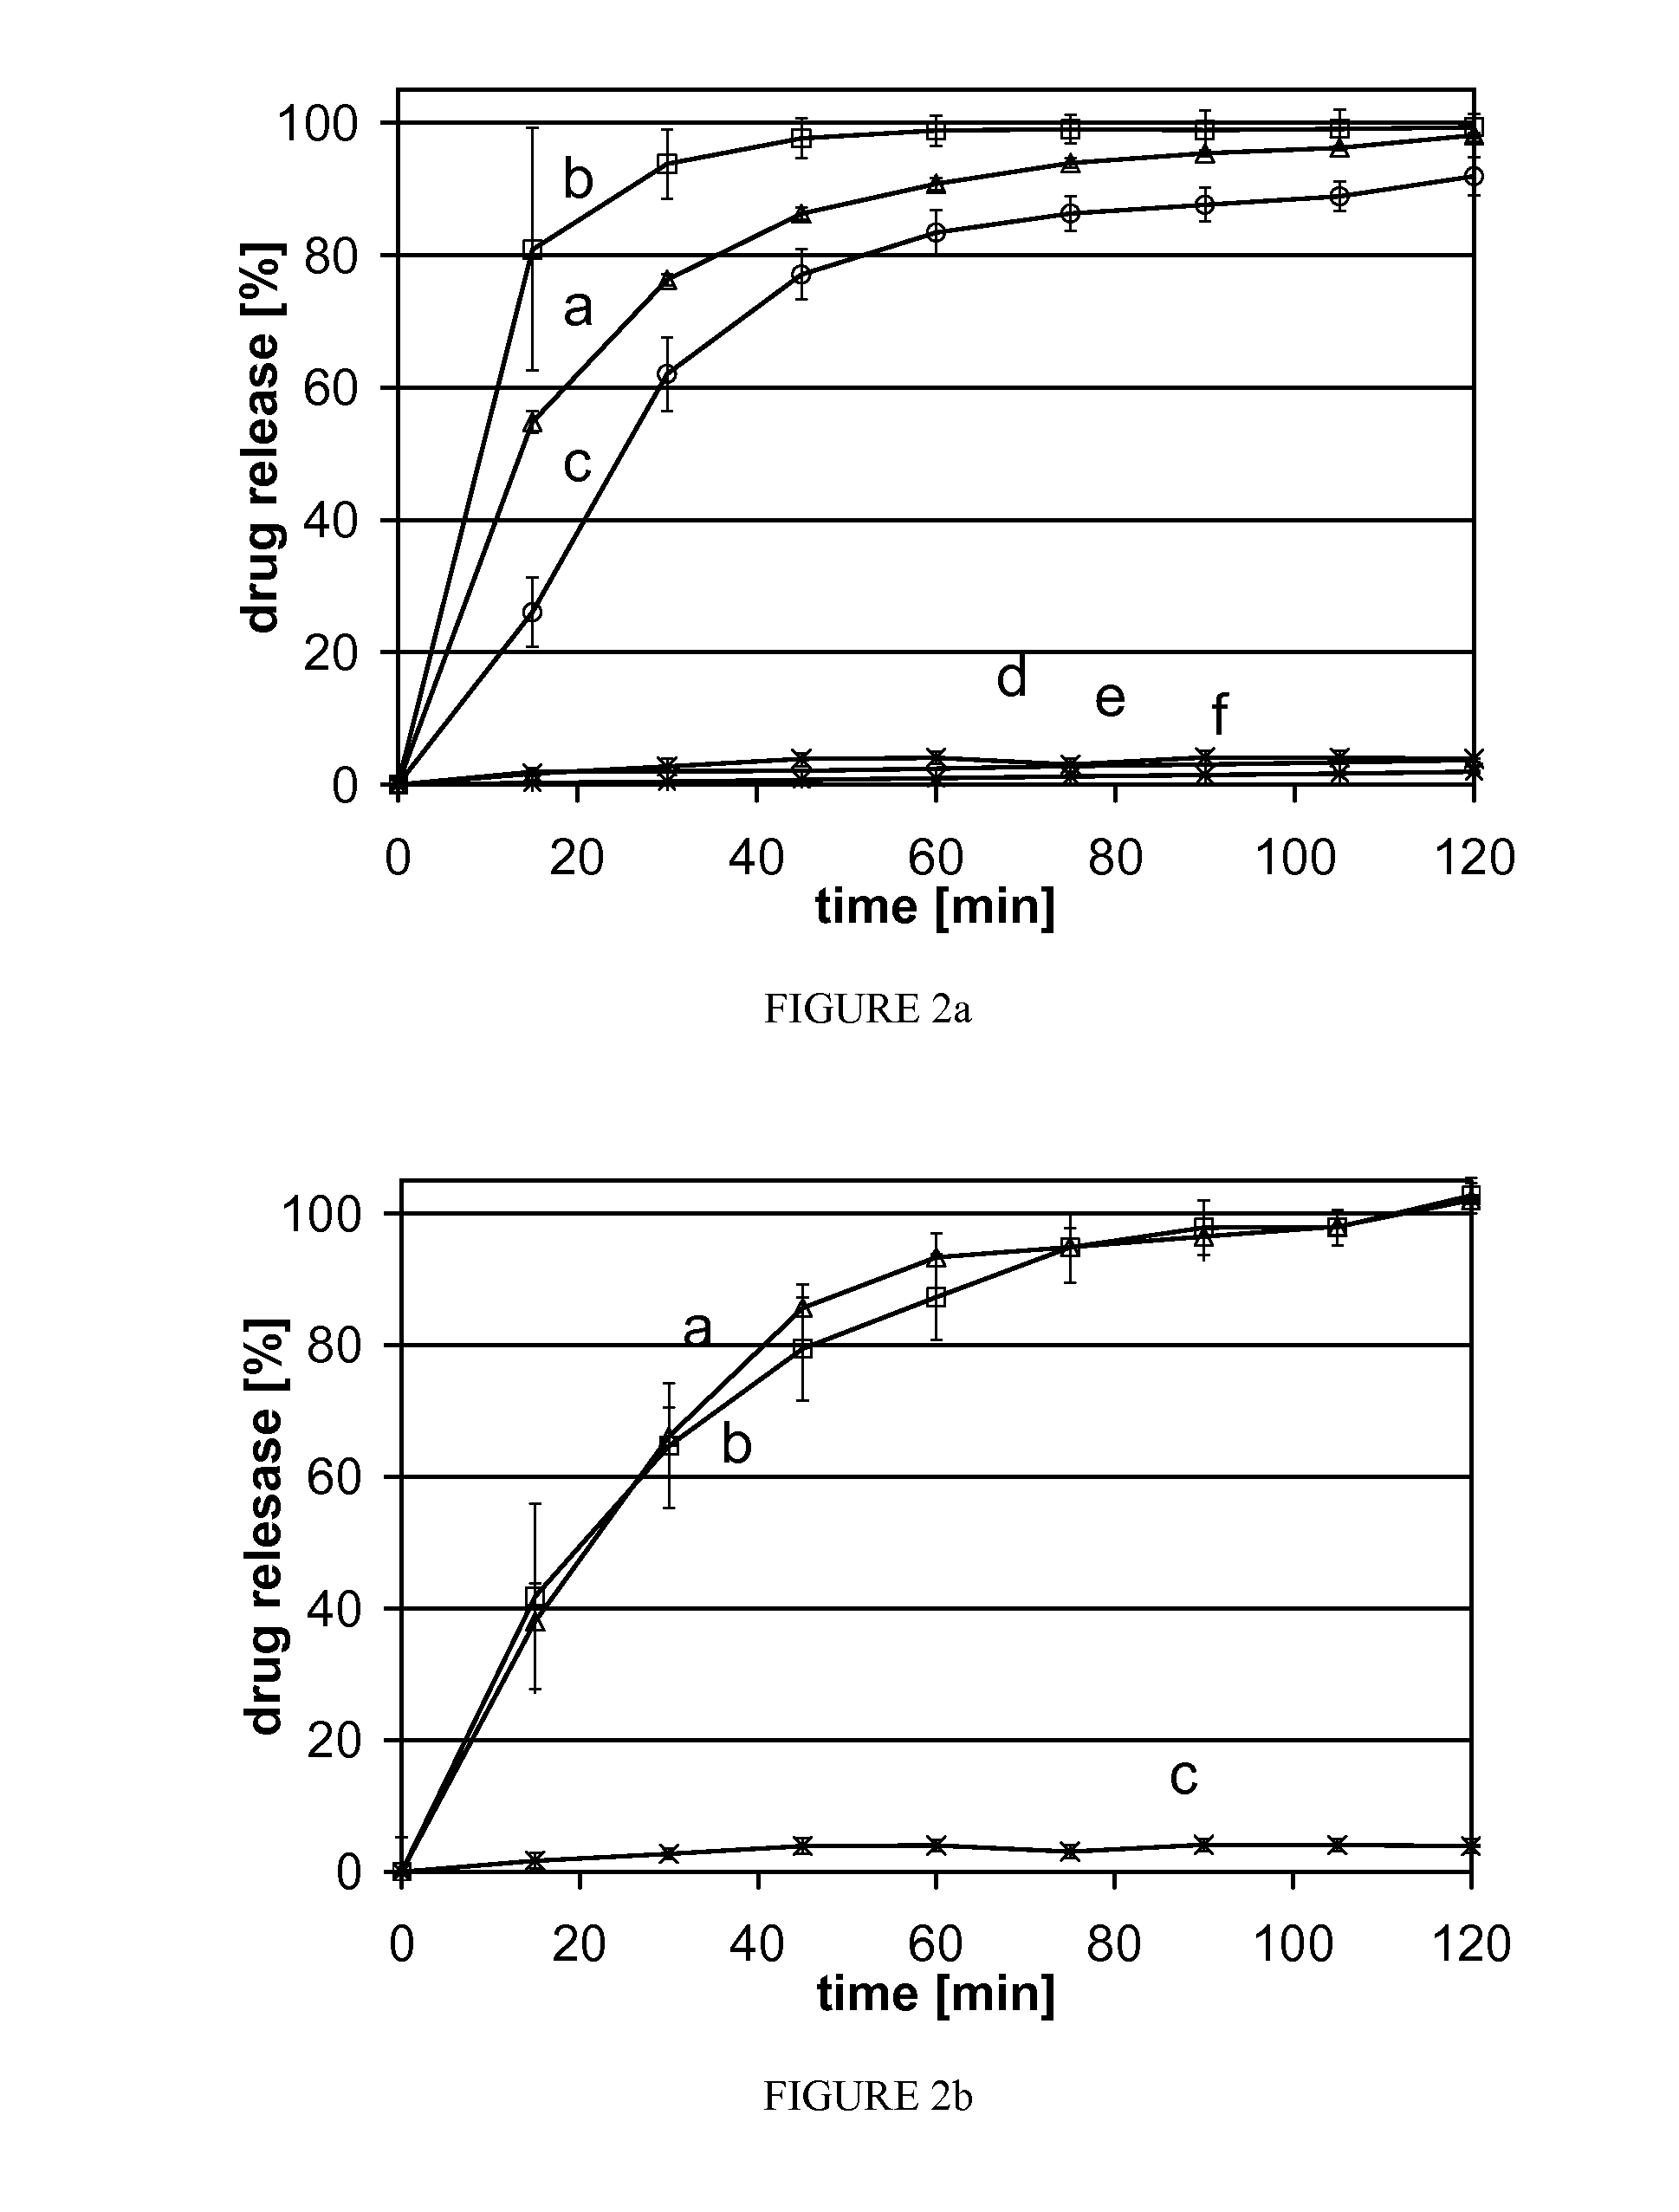 Solid formulations of crystalline compounds